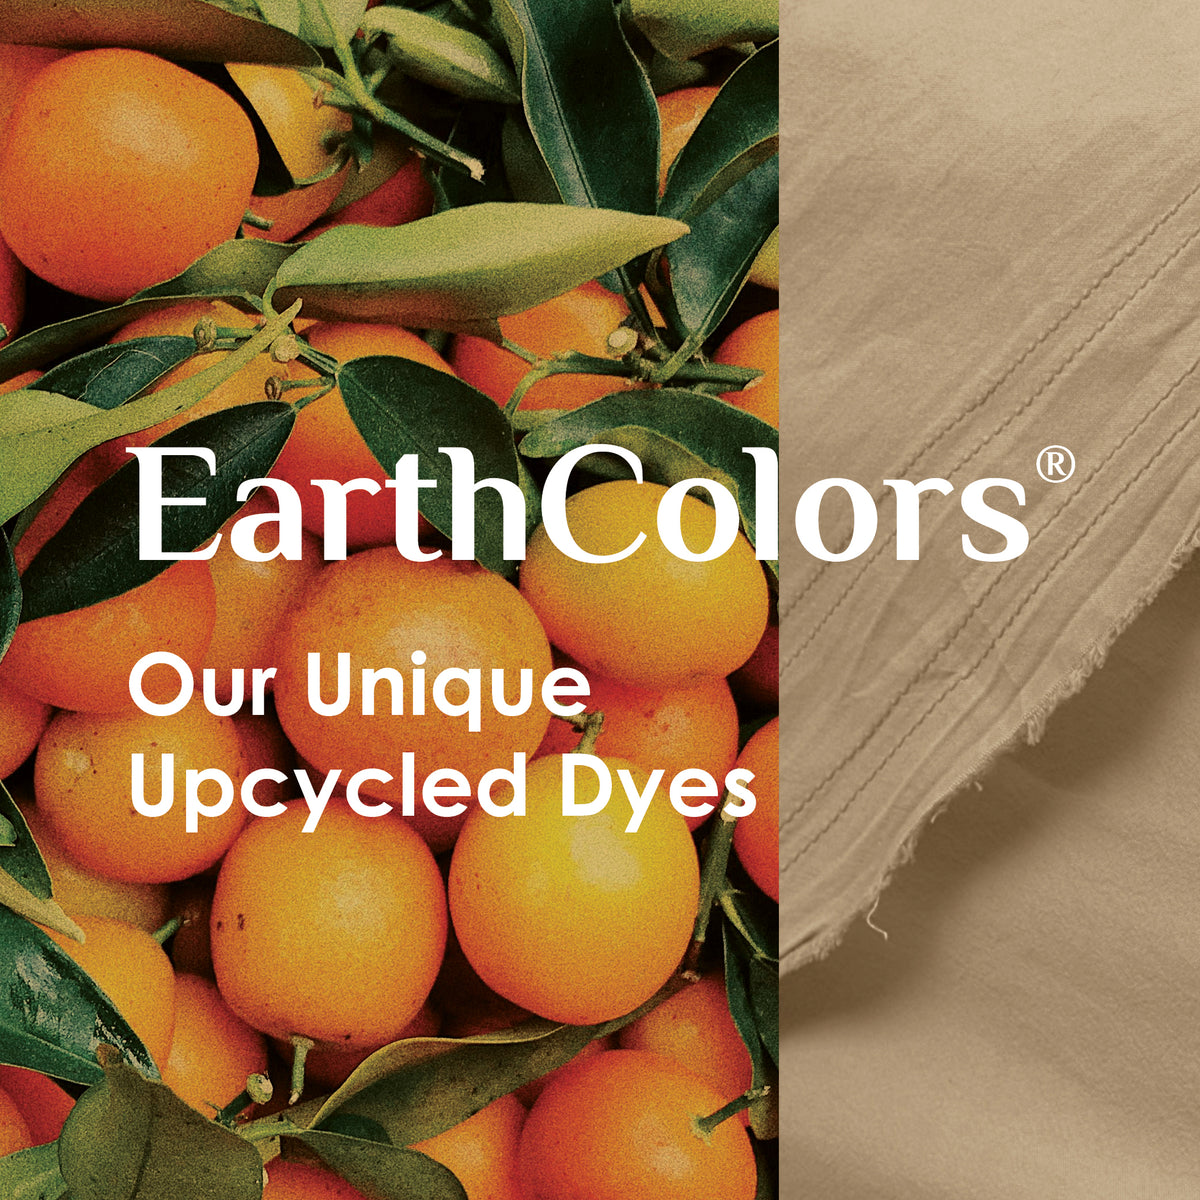 Image of oranges beside Ochre fabric with the caption: EarthColors® Our Unique Upcycled Dyes